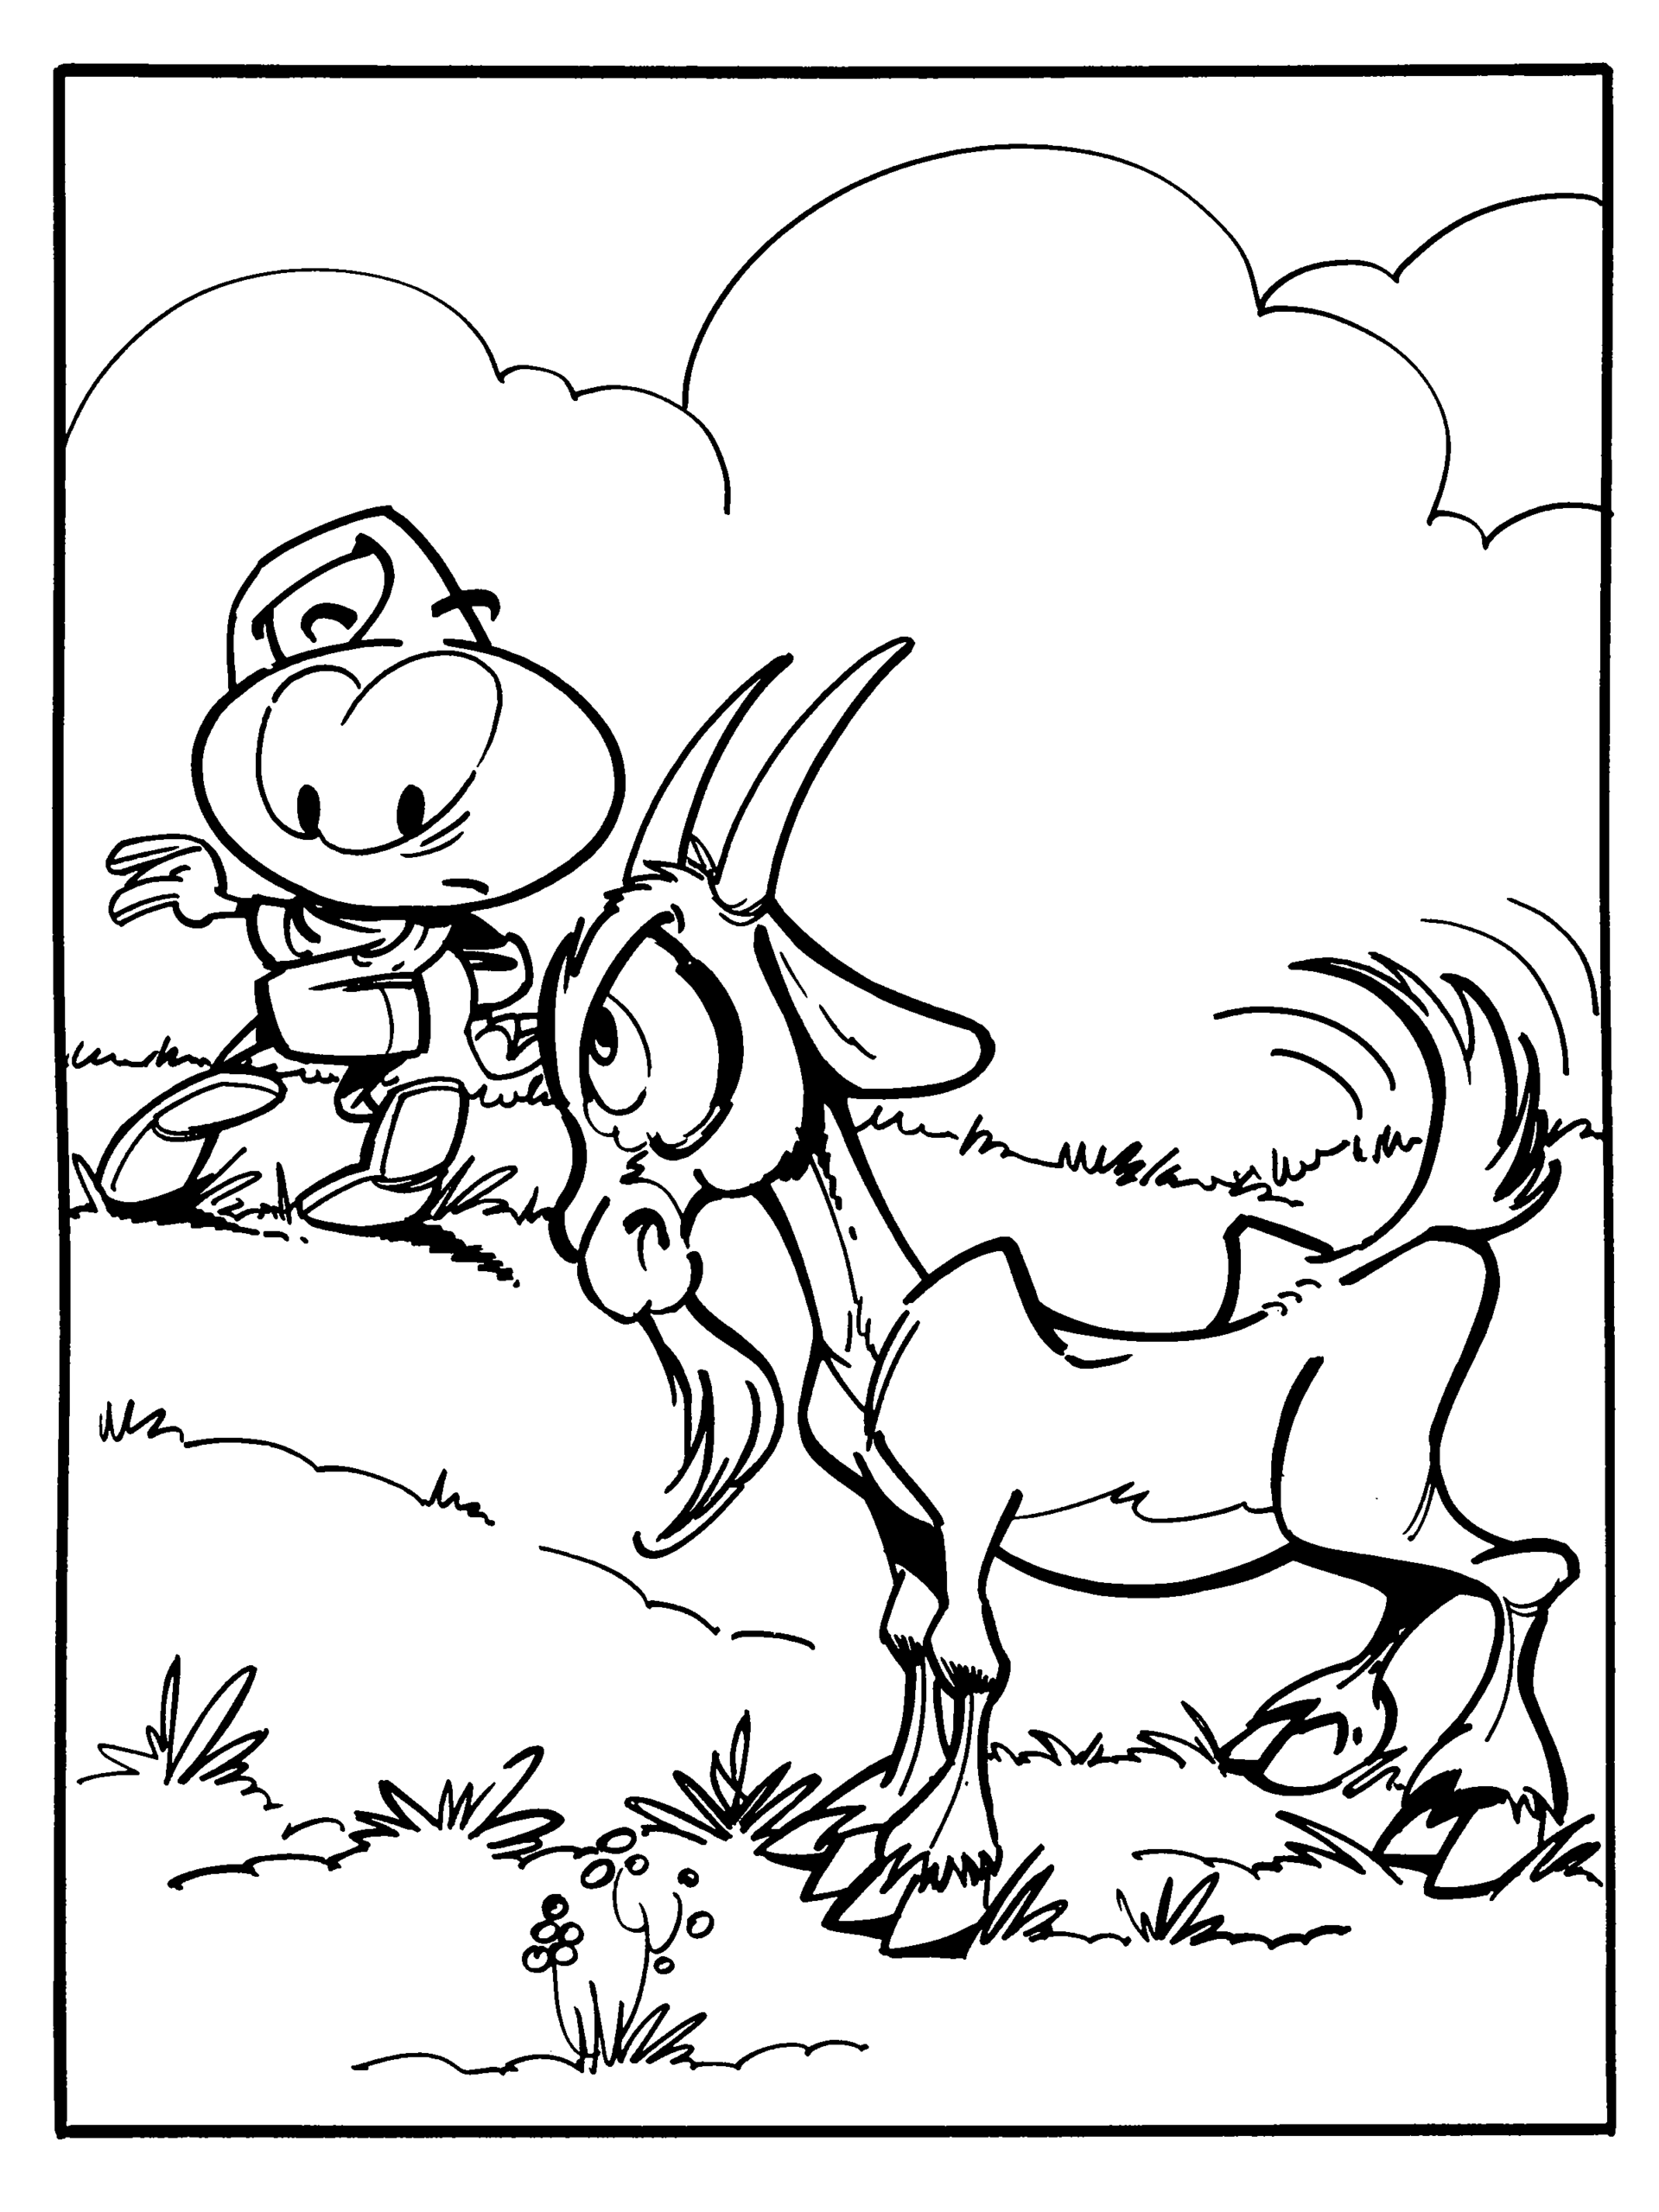 Snorks Coloring Pages TV Film snorks 22 Printable 2020 07655 Coloring4free